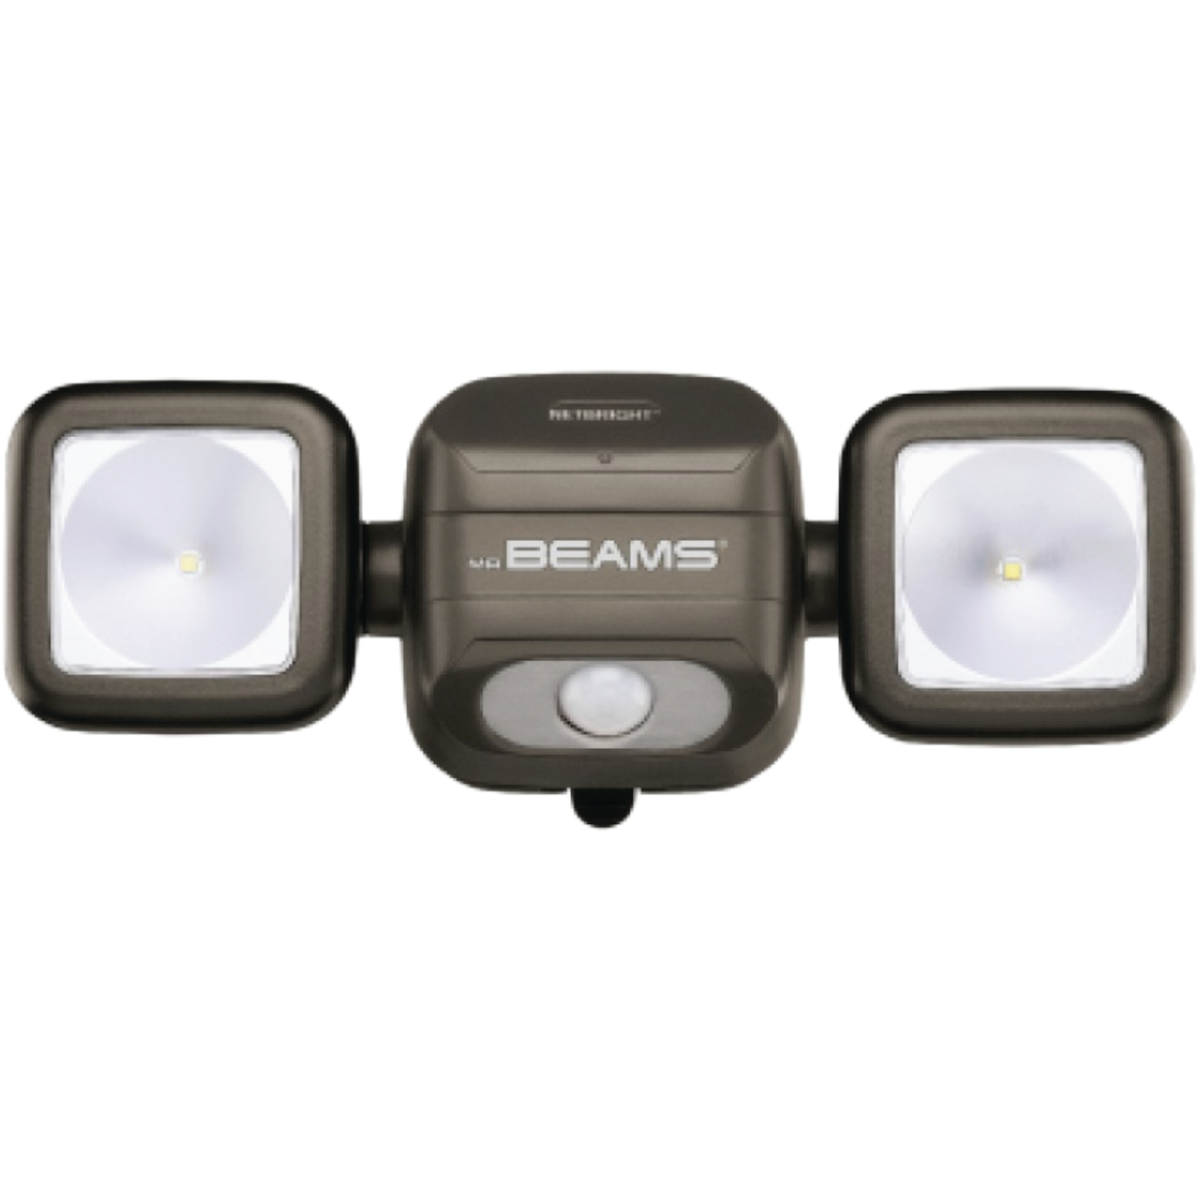 Battery Operated Security Light Fixture